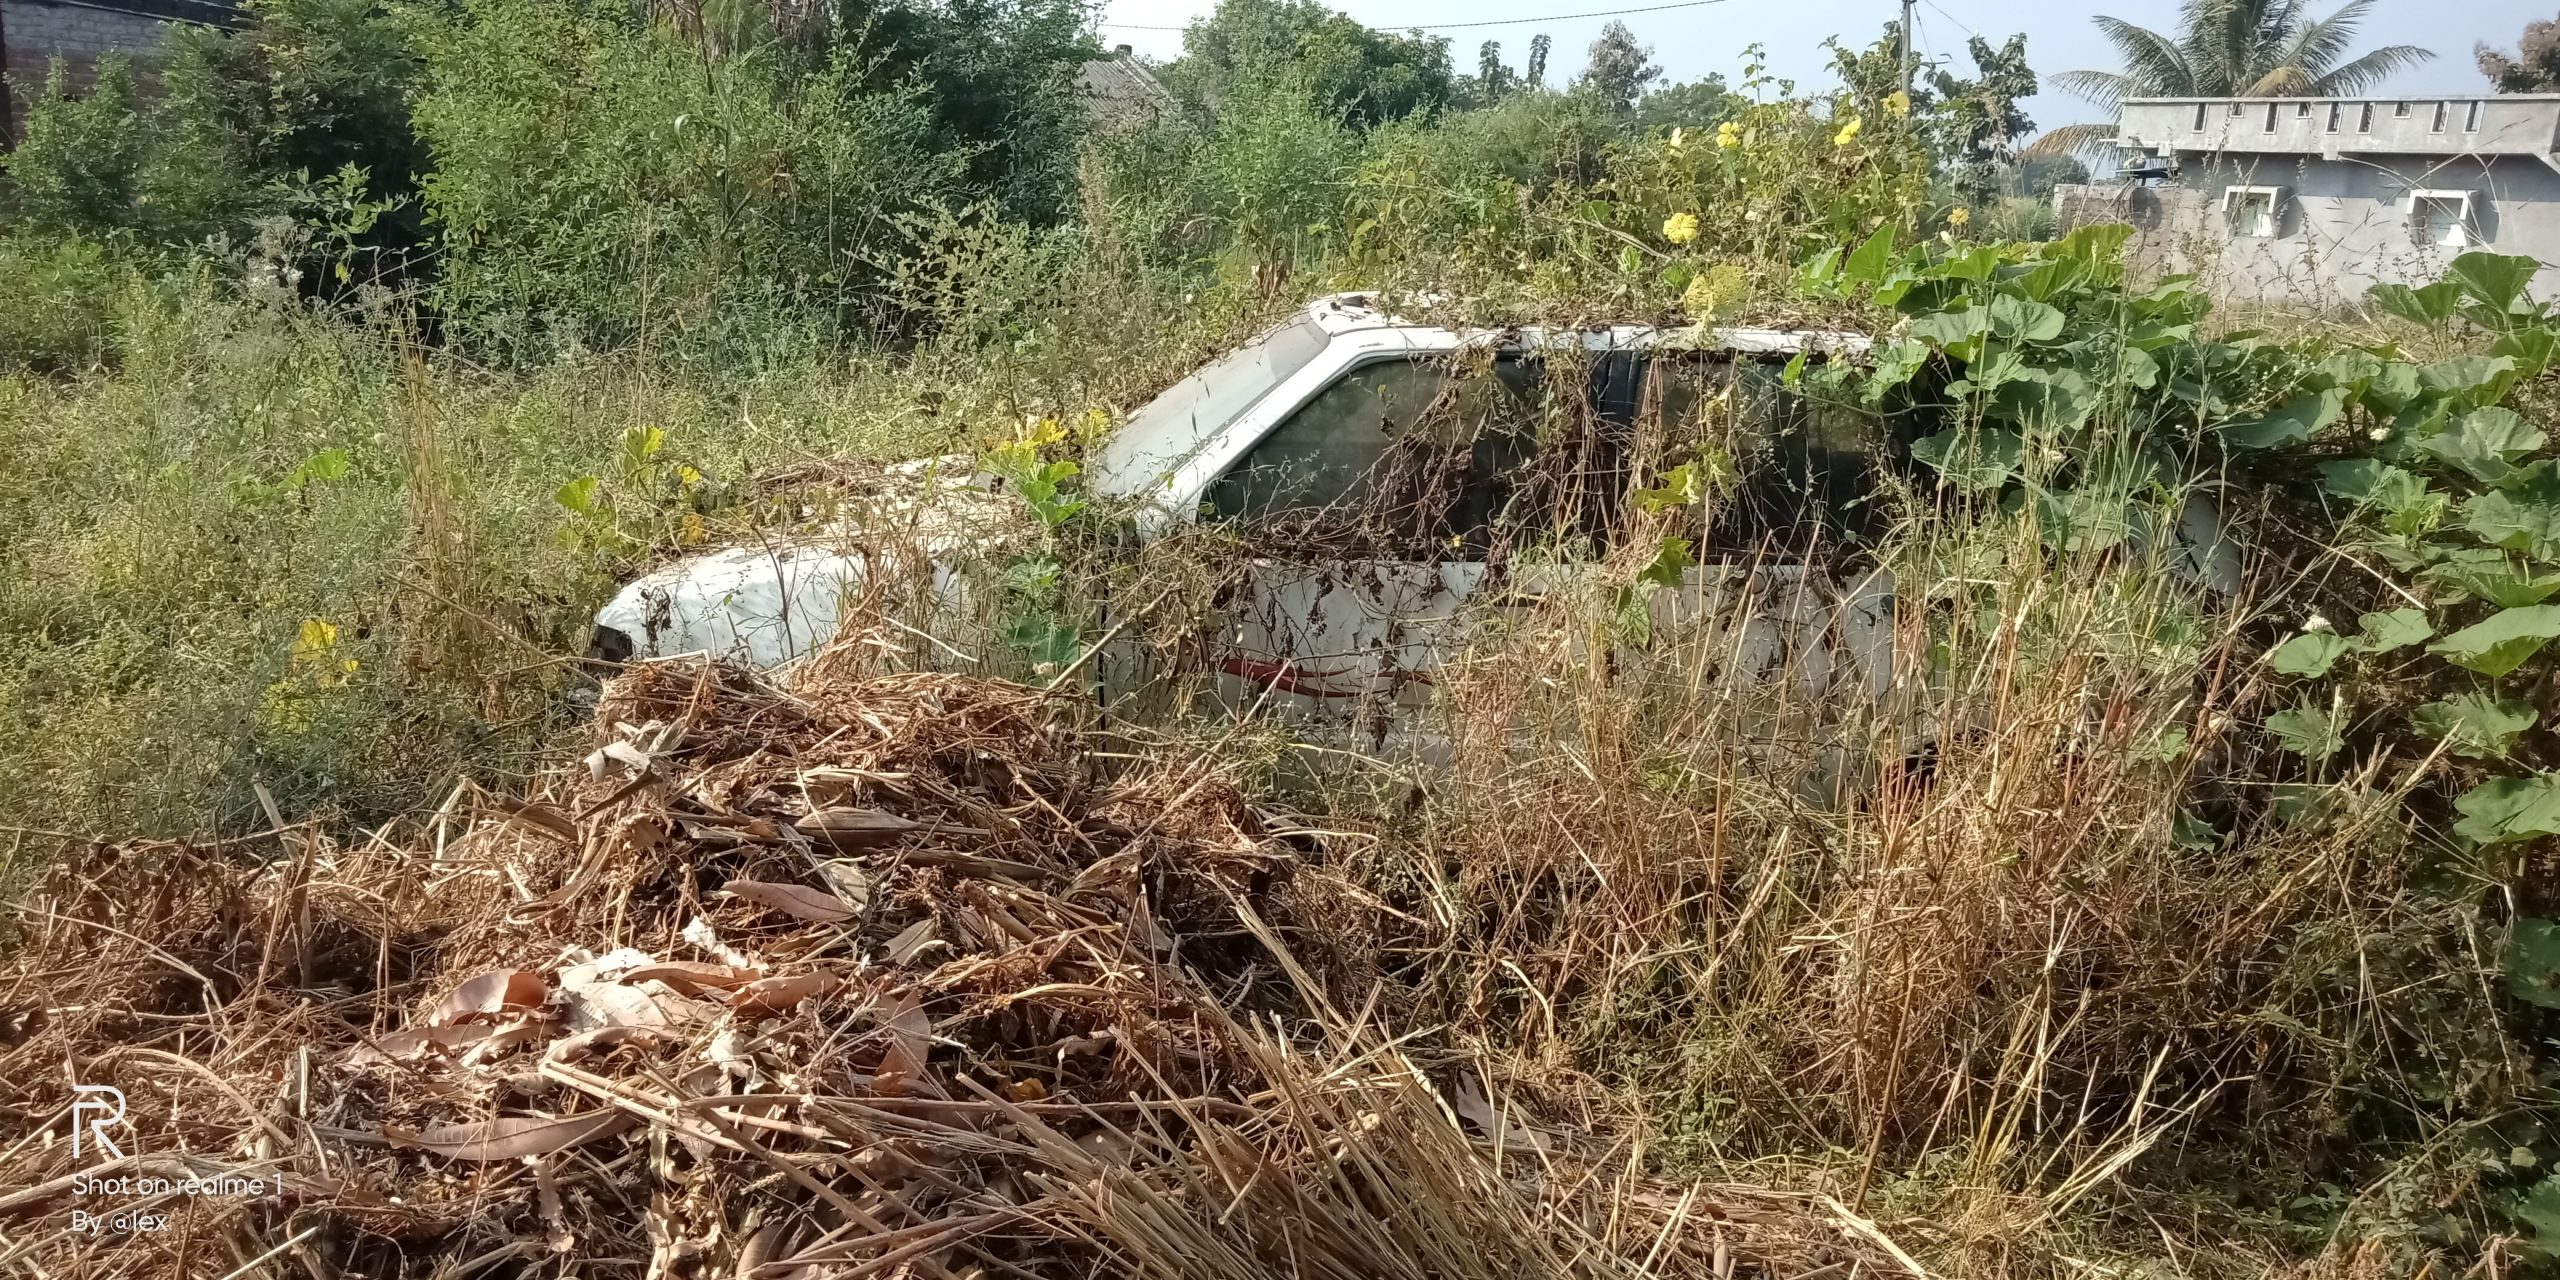 An old car in bushes